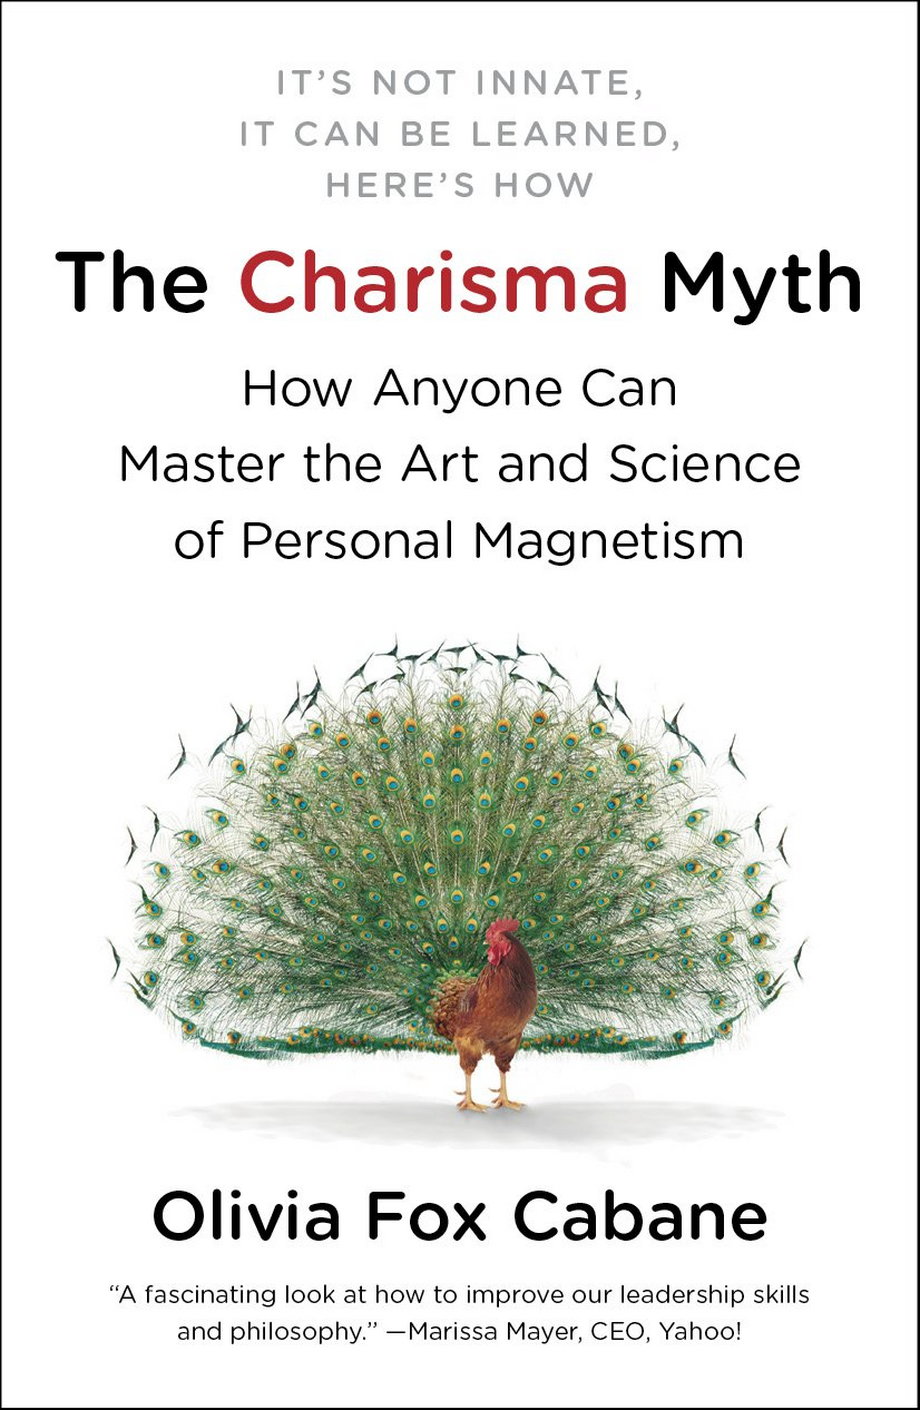 Marissa Mayer is a big fan of "The Charisma Myth," which teaches that anybody can be trained to be a great leader.